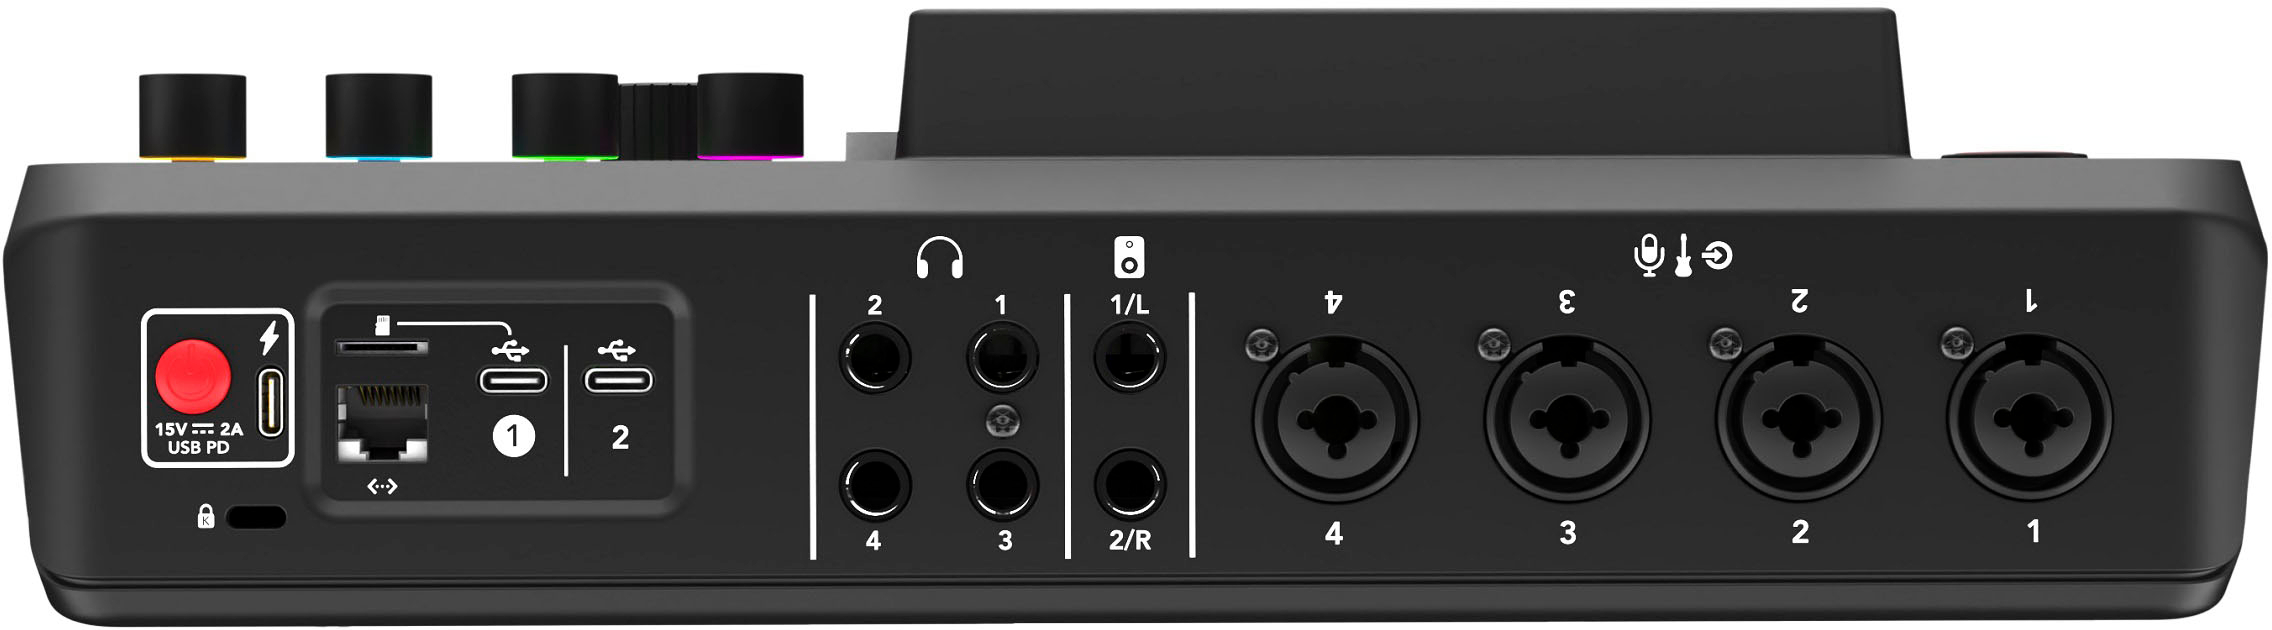 RØDECaster Pro II And RØDECaster Duo User Group